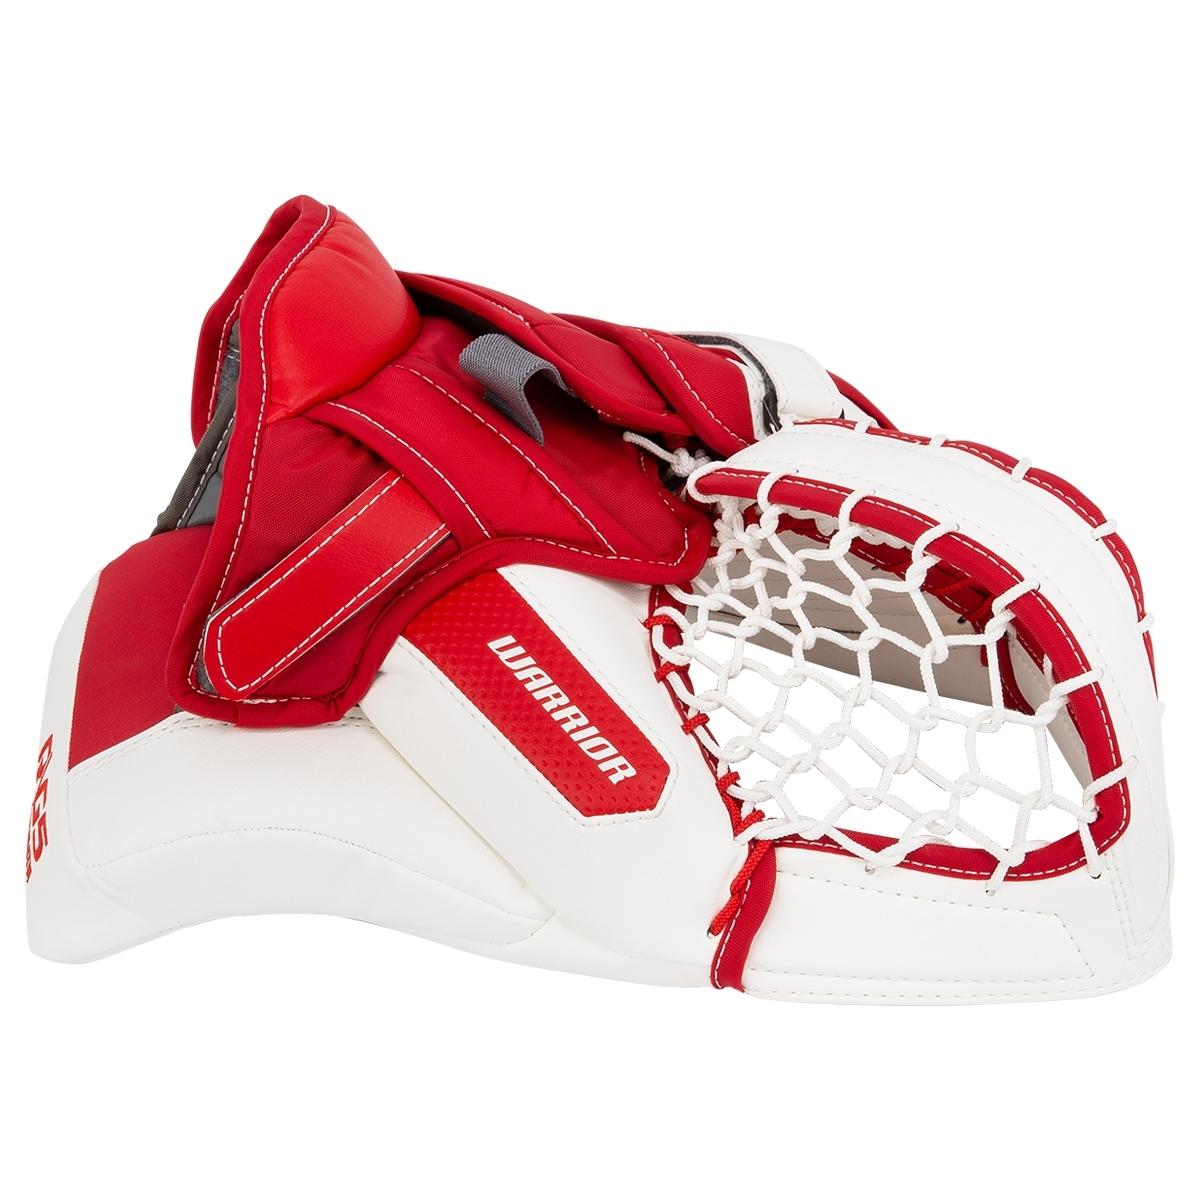 Warrior Ritual G5 Int. Goalie Gloveproduct zoom image #2